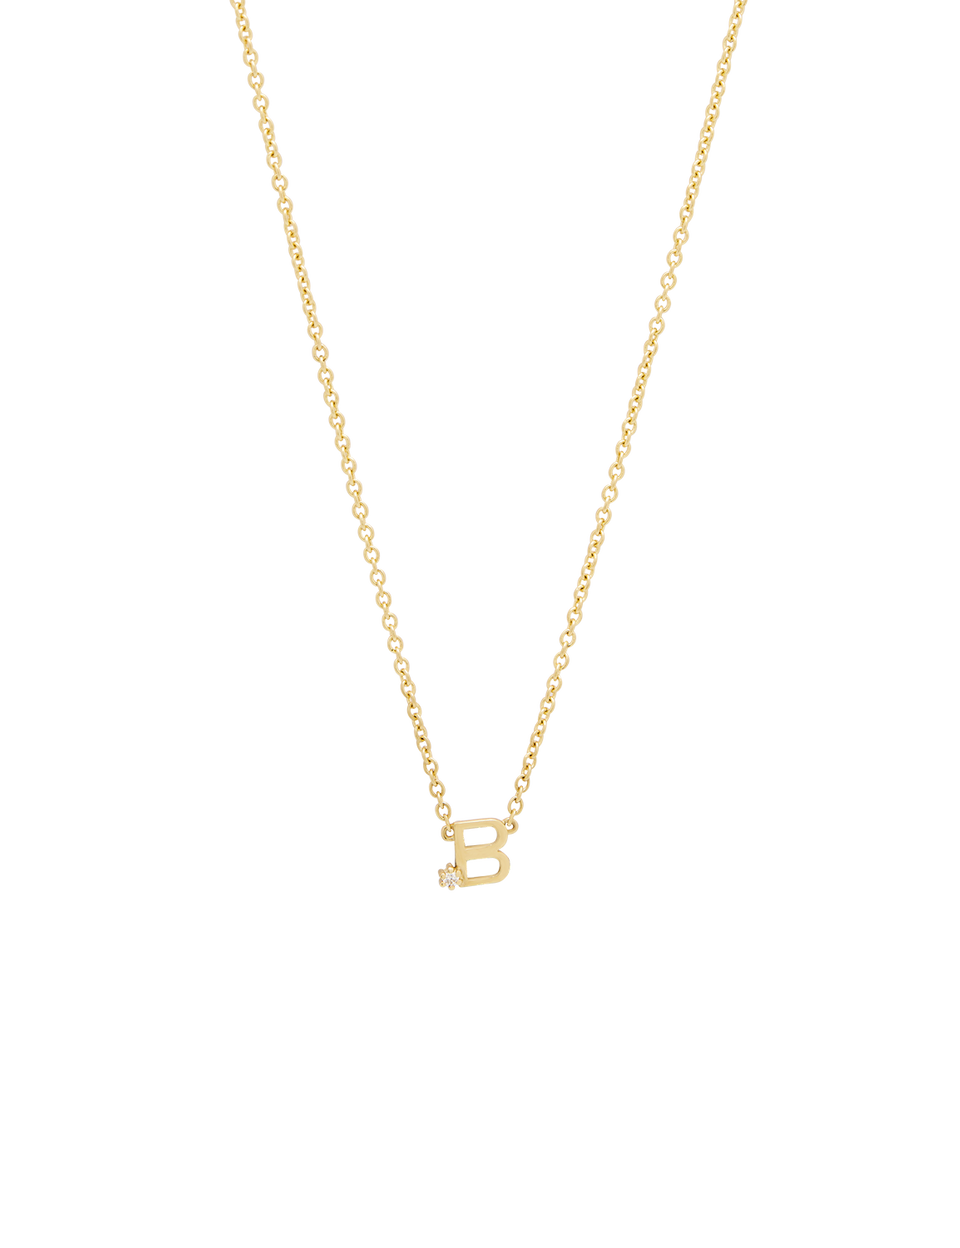 Solid Gold Jewellery - Ethically Crafted 14K Solid Gold Jewellery – S ...